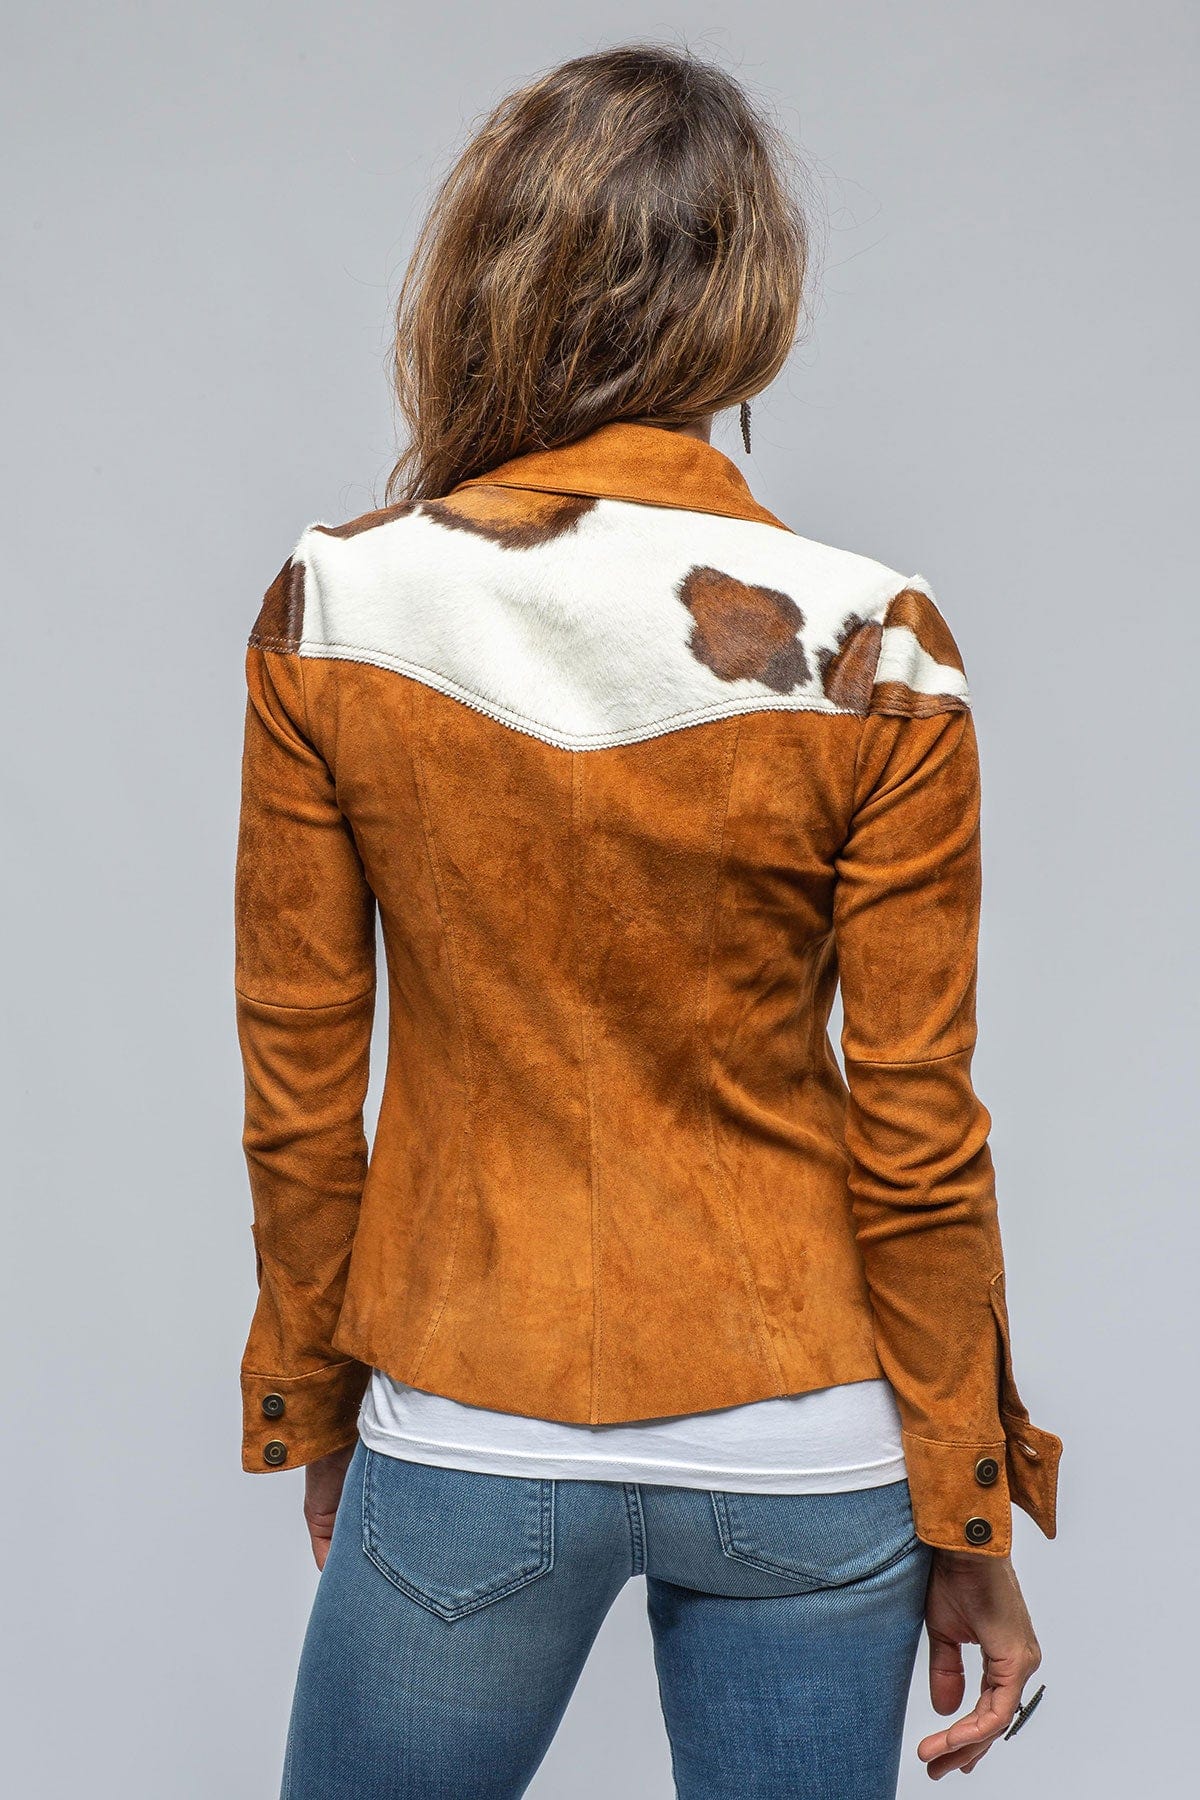 Saguaro Suede Shirt With Hair-On-Hide Details In Cognac Rust - AXEL'S